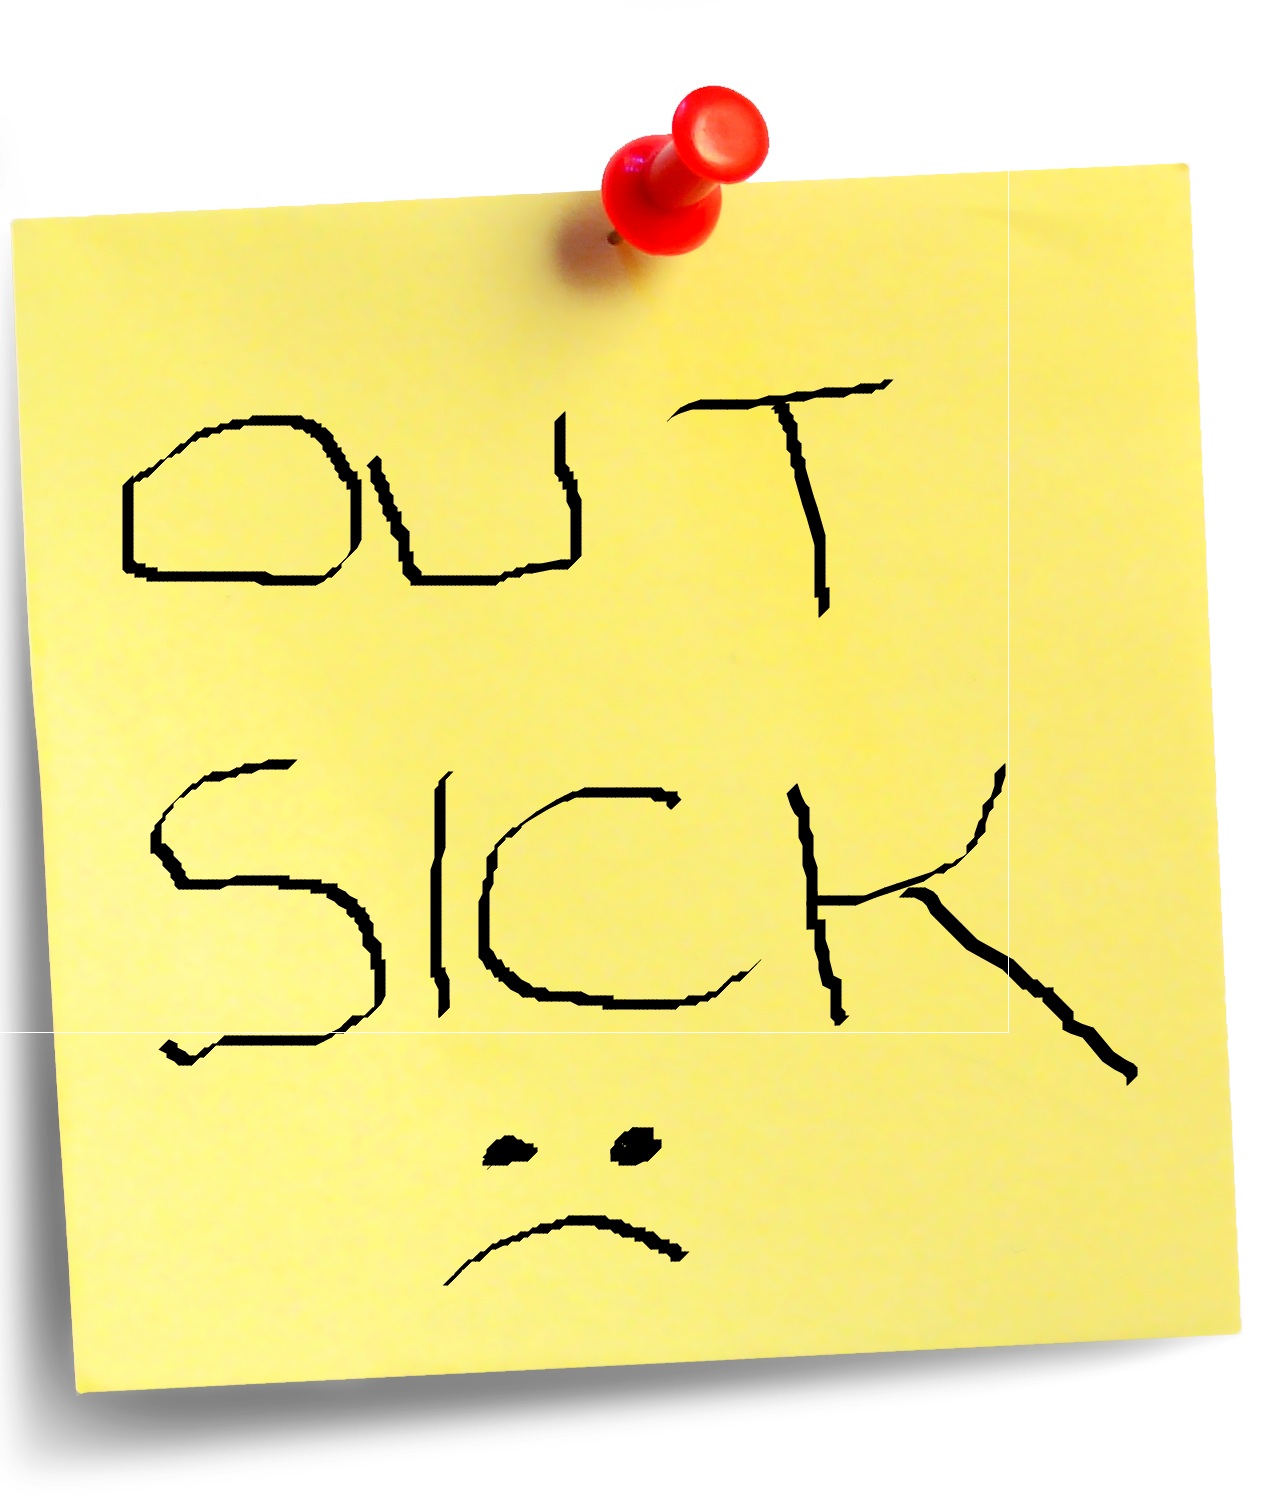 Massachusetts Issues Final Regulations for Earned Sick Time